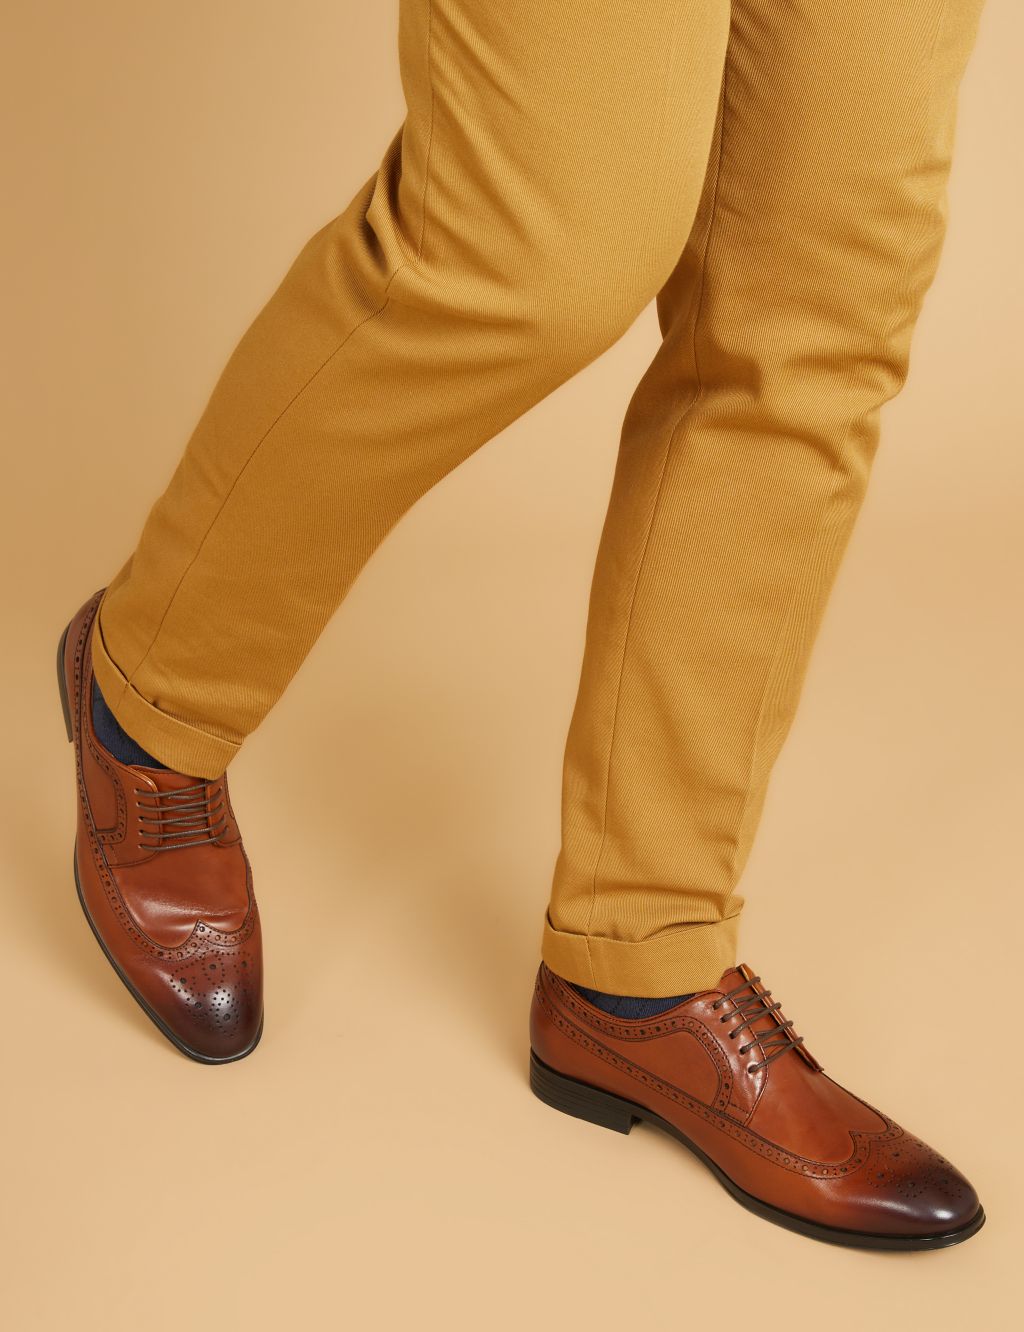 Leather Brogues image 1